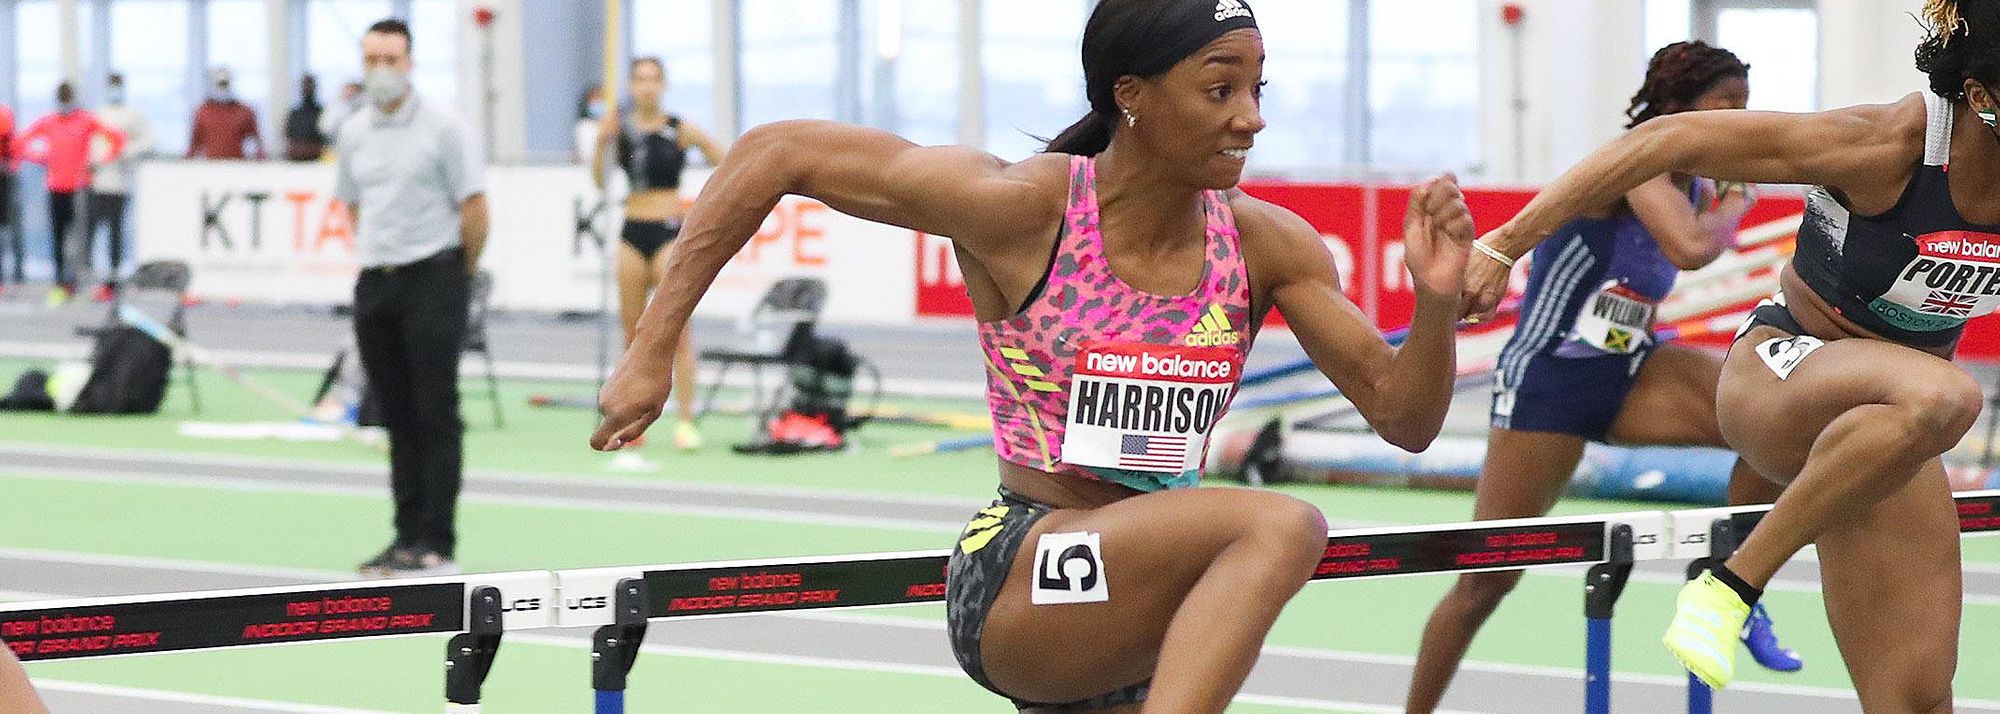 Terrence Jones breaks through with 6.45 for 60m, Kendra Harrison storms to 7.81 60m hurdles win